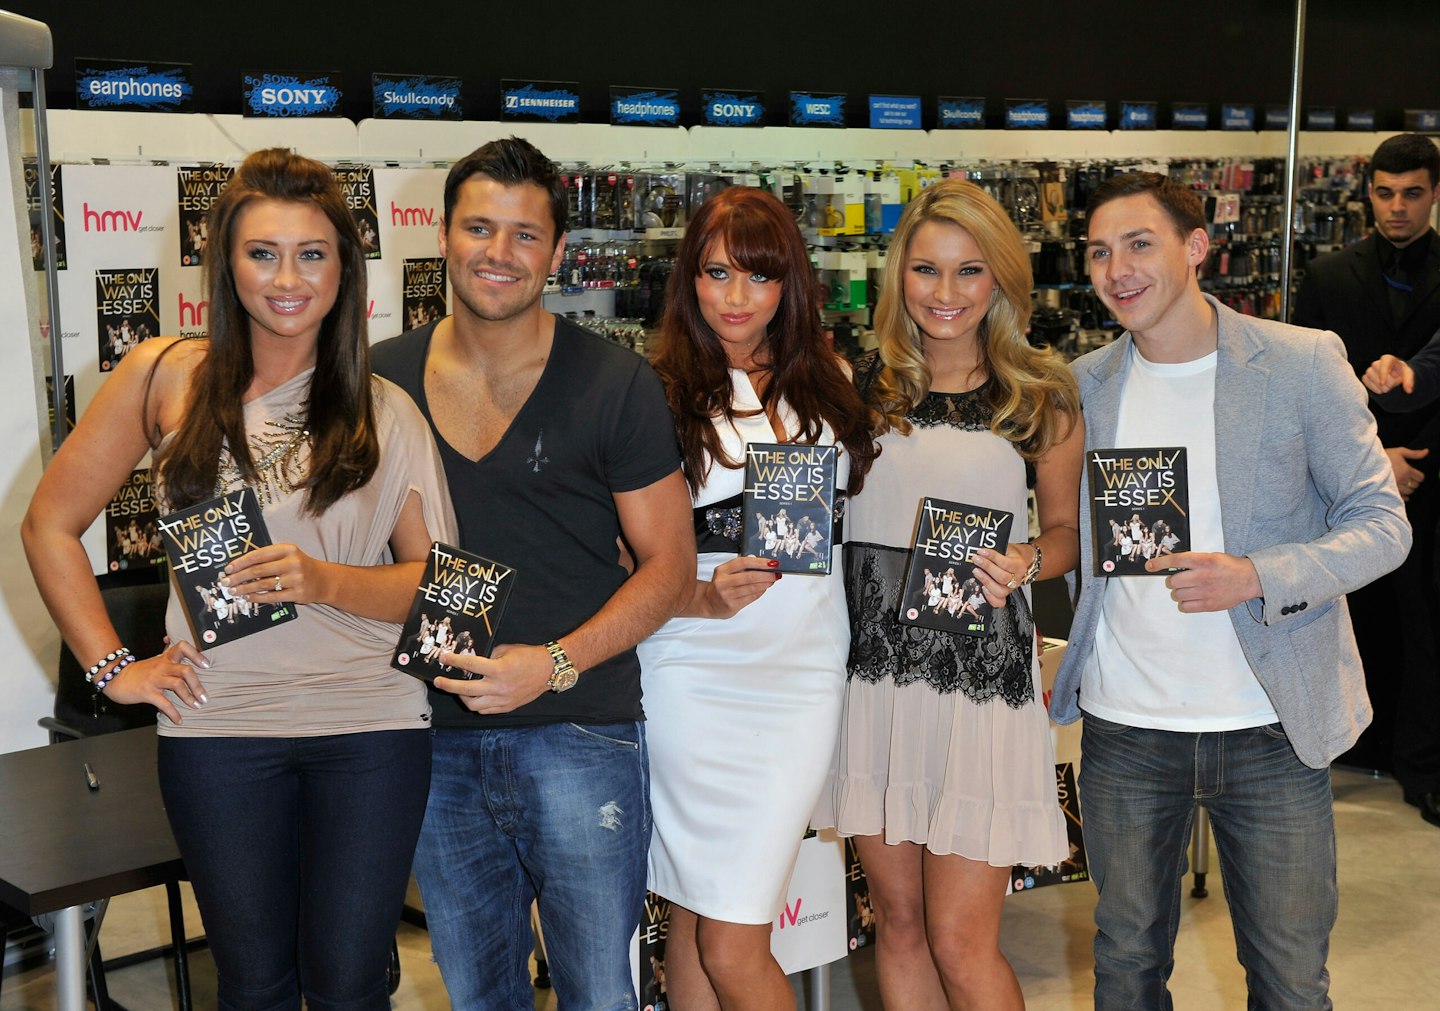 towie lauren goodger, mark wright, amy childs, sam faiers and kirk norcross